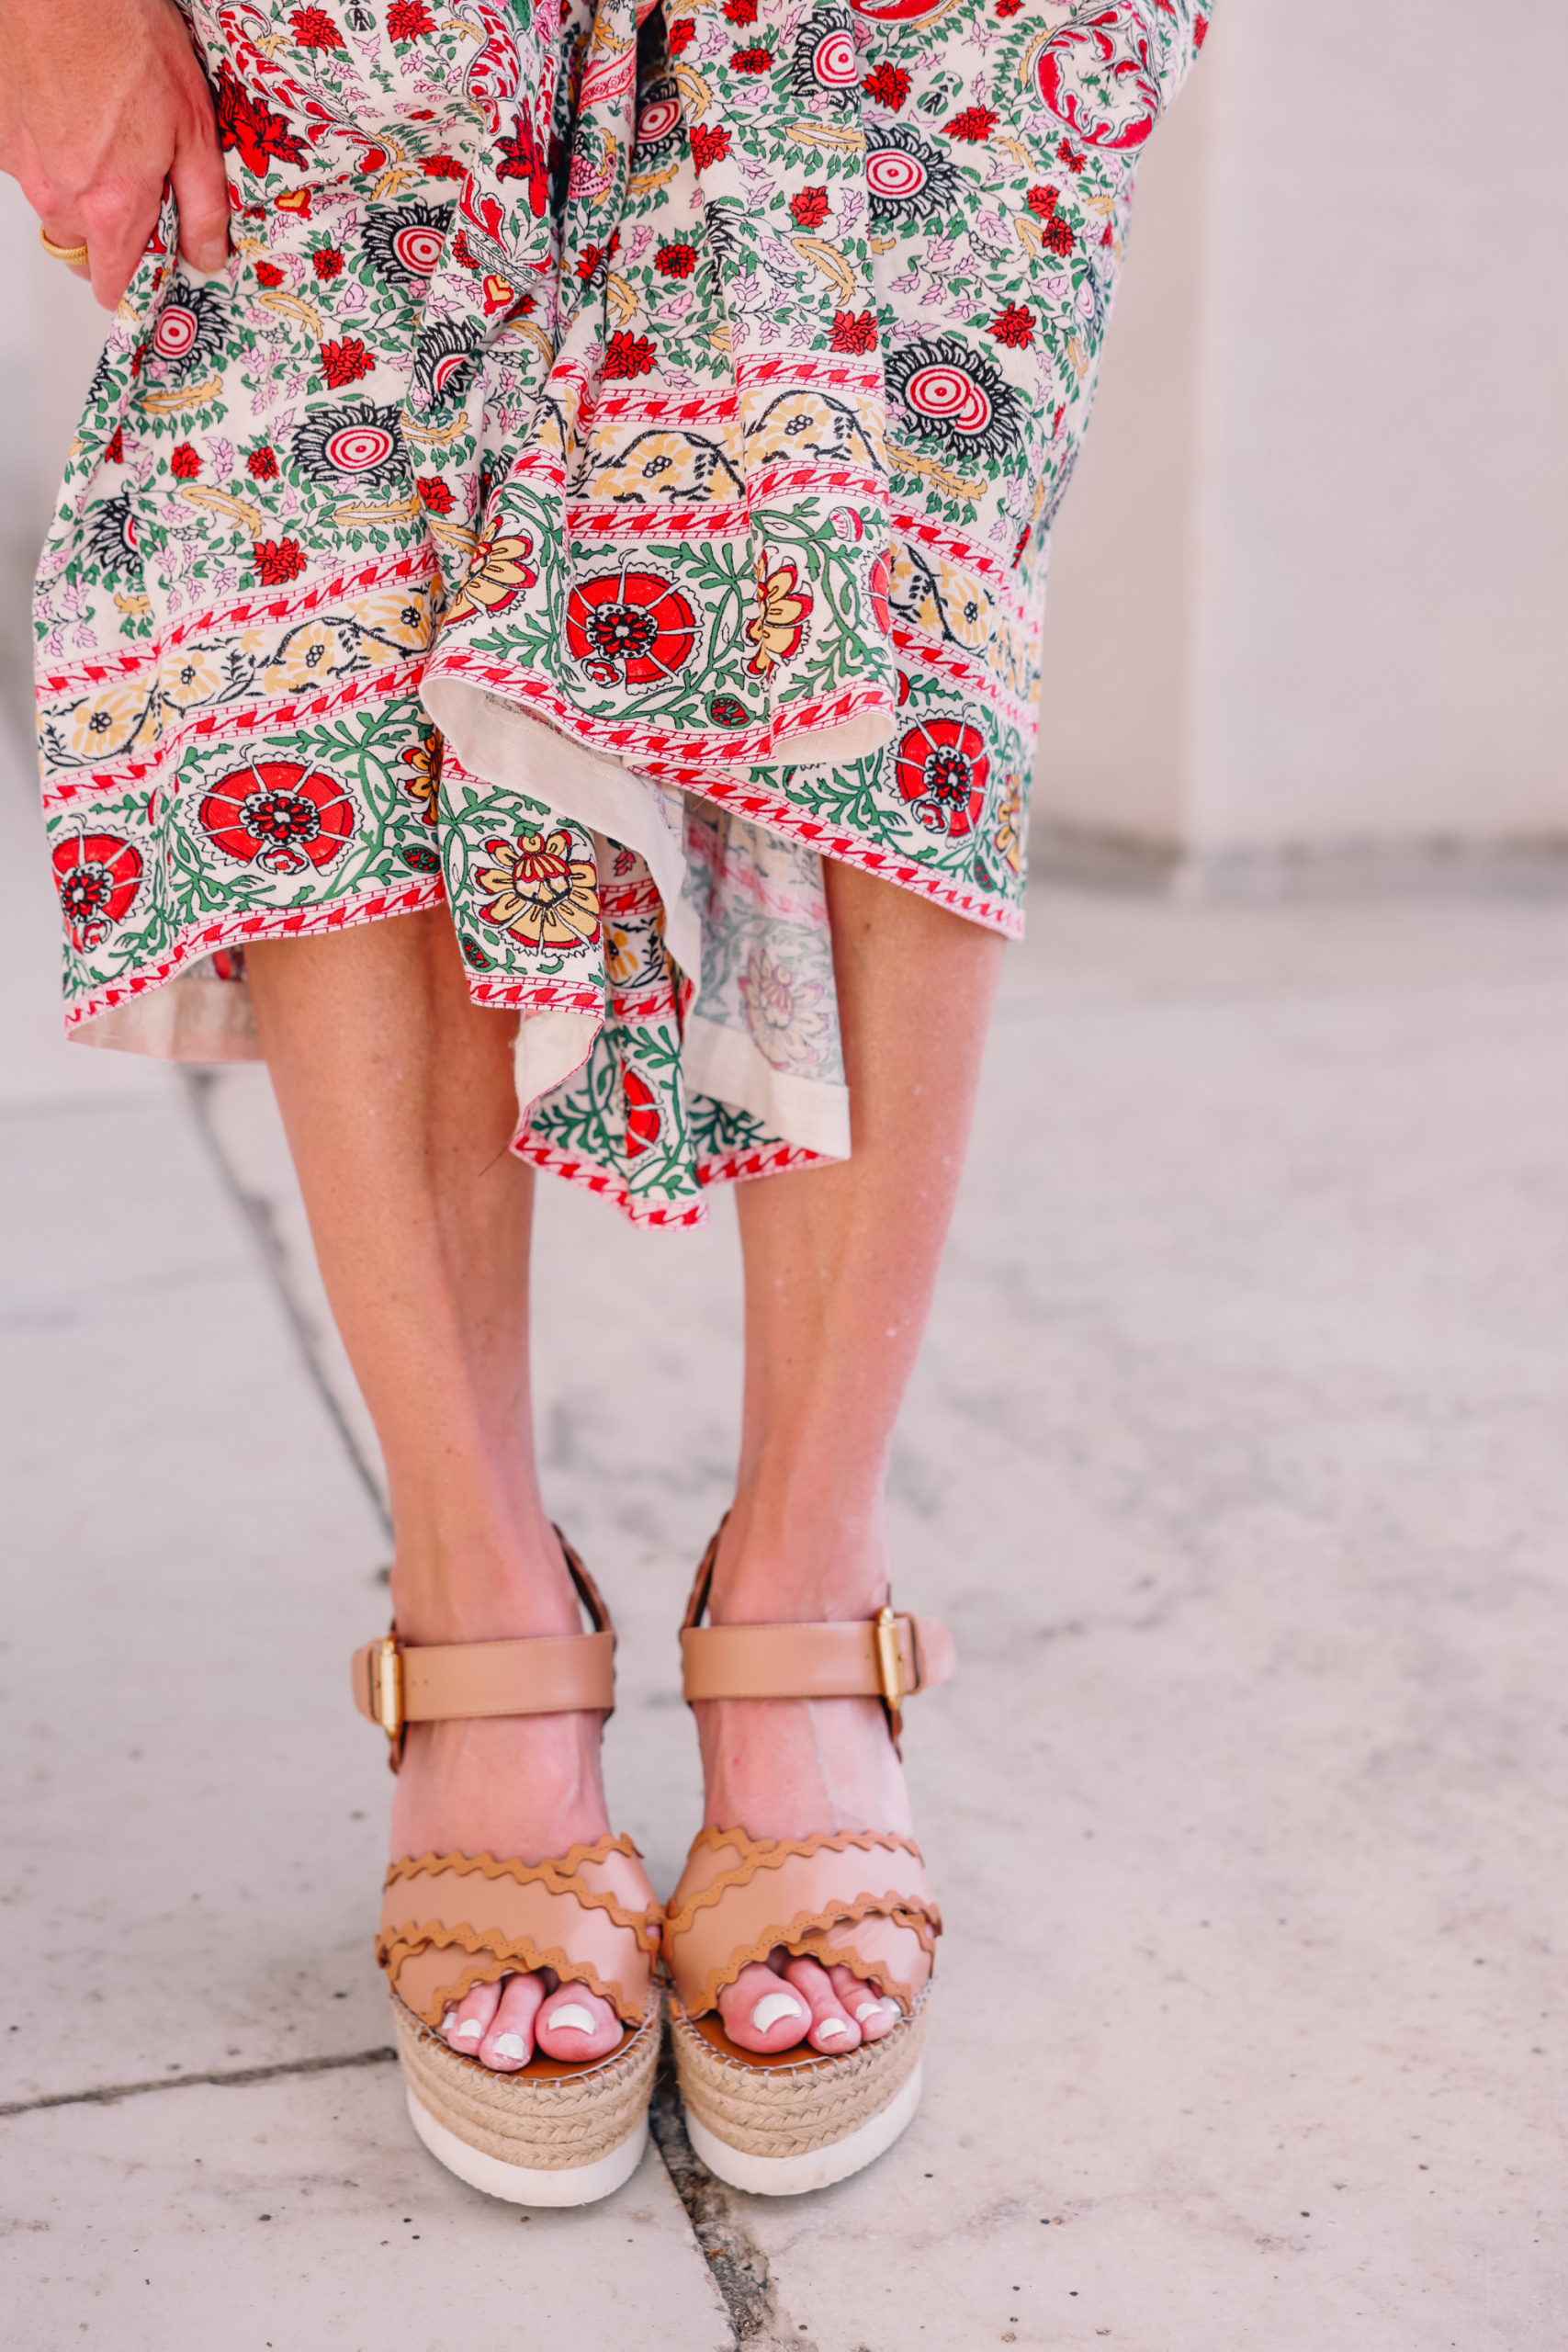 maxi skirts, how to wear a maxi skirt, how to wear a mixi skirt over 40, maxi skirts over 40, alice + olivia embroidered skirts, nation LTD ruffle tee, see by chloe espadrille wedges, perfect outfit formula, perfect summer outfit